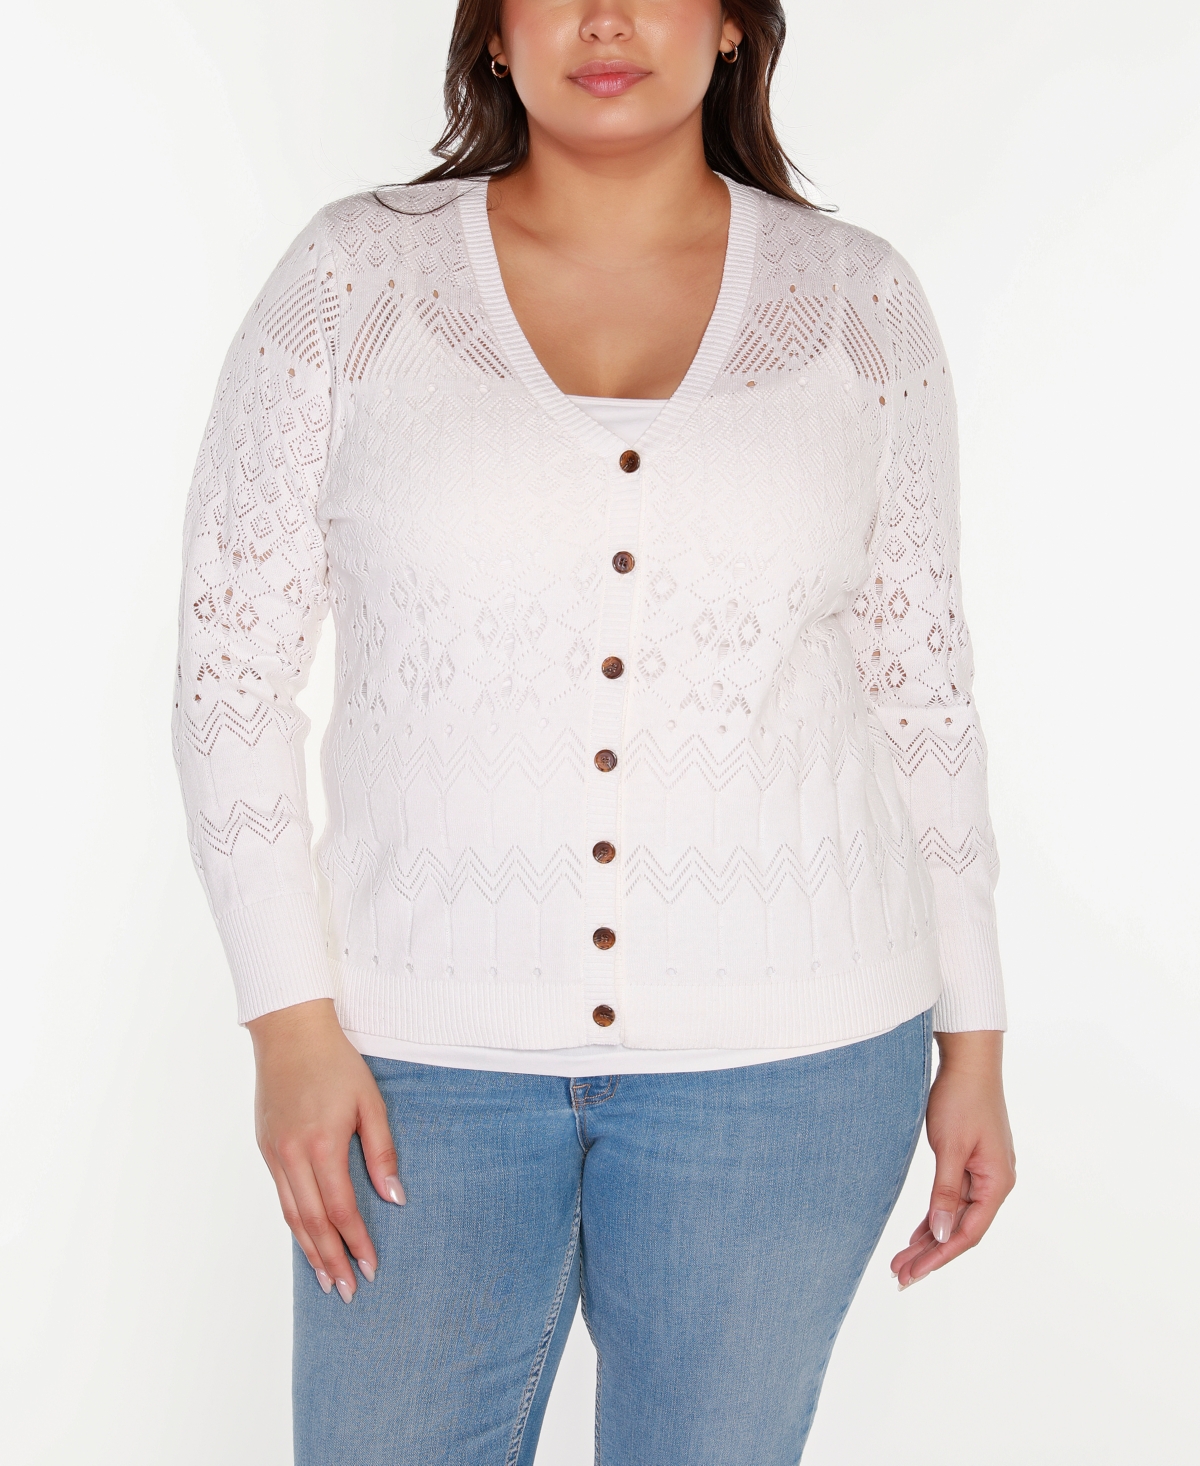 Belldini Black Label Plus Size Embellished Button Front Cardigan Sweater In White